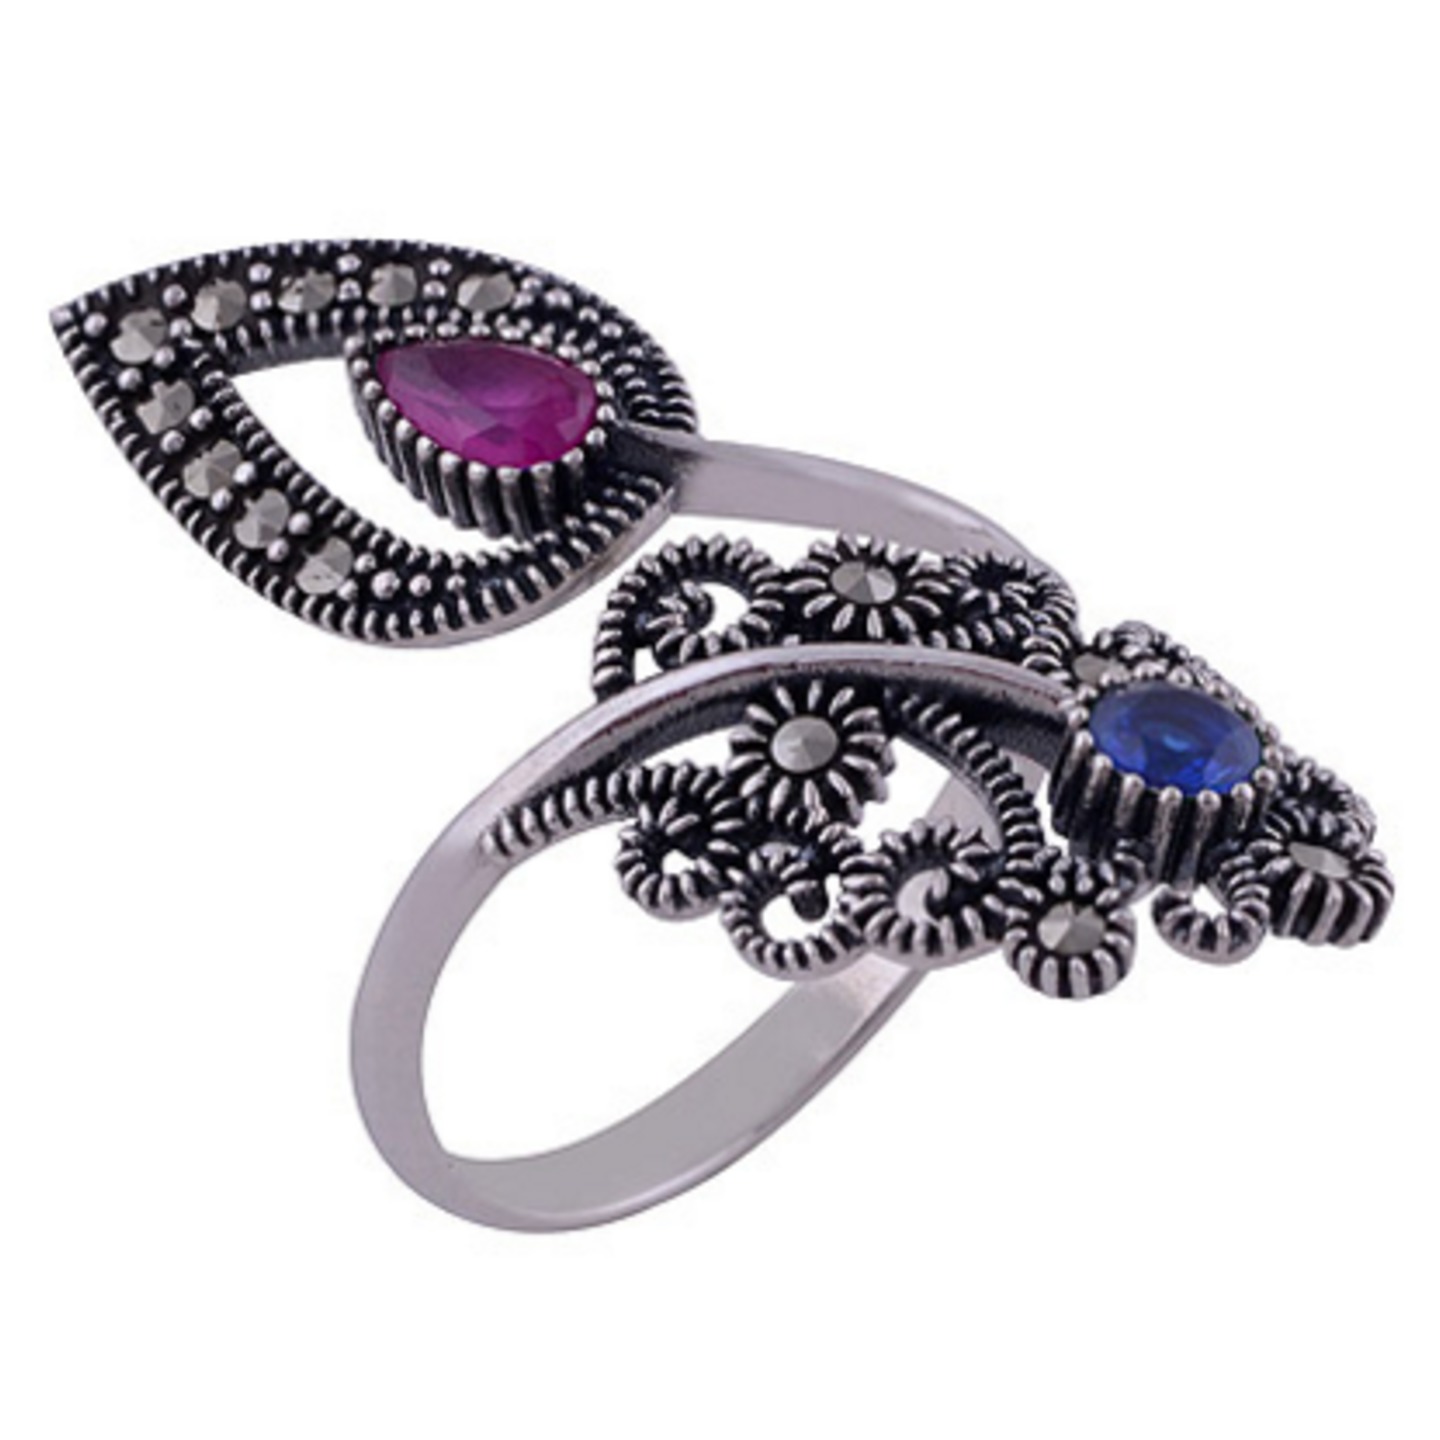 The Red Blue Pasley Silver Ring